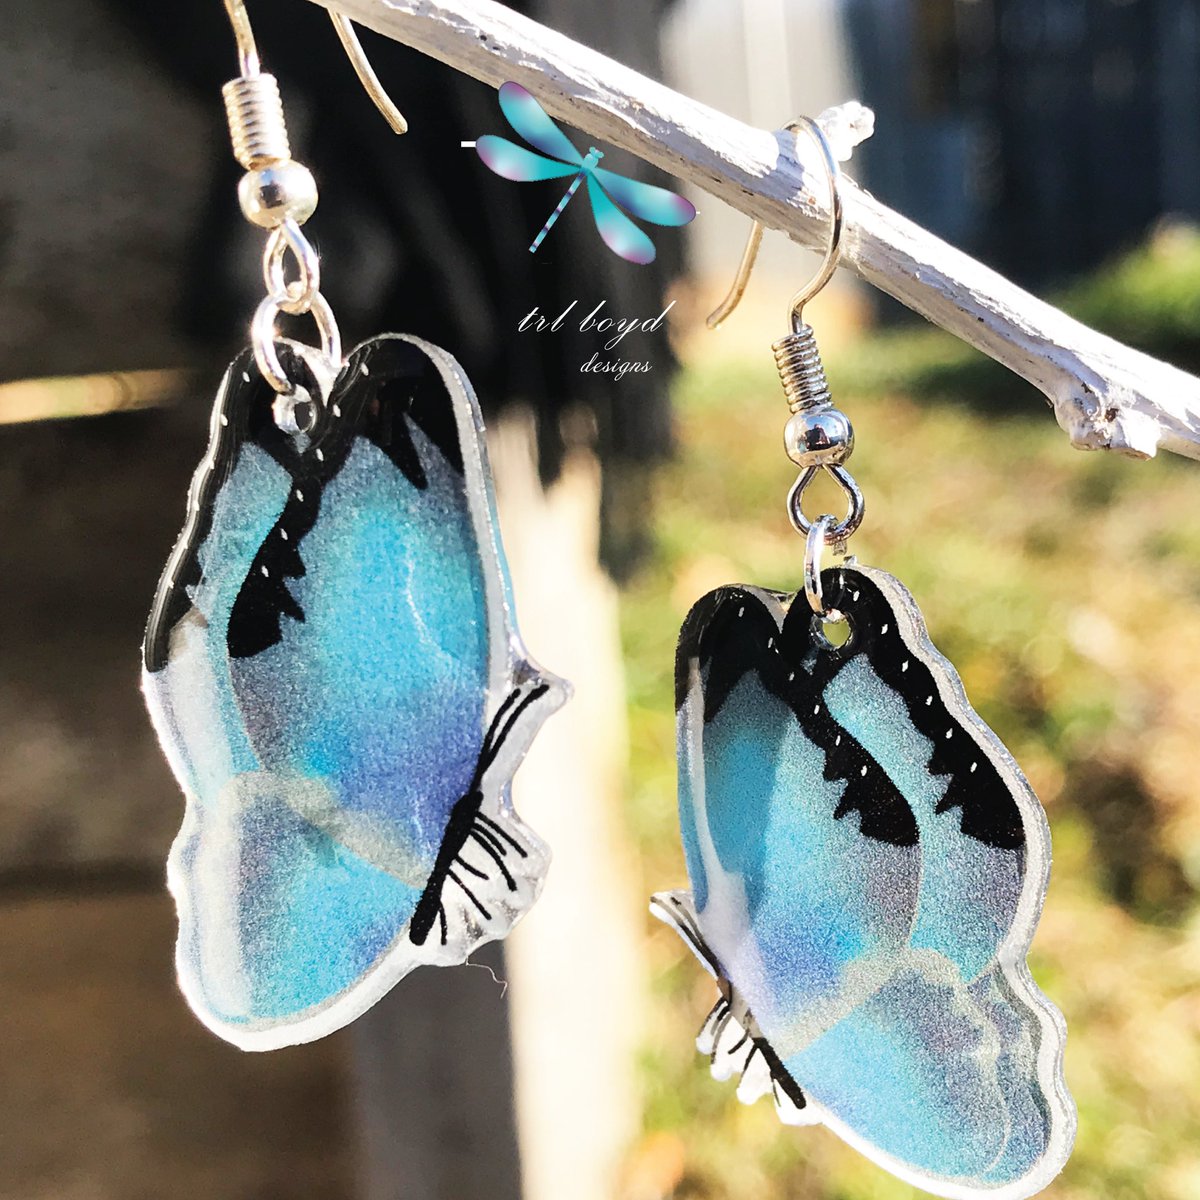 As well as the dark blue and black butterfly earrings available at trlboyddesigns.etsy.com we have the lighter blue and black butterfly earrings.

#butterfly #butterflyearrings #butterflyjewellery #etsyseller #noveltyearrings #statementearrings #hope #butterflylovers